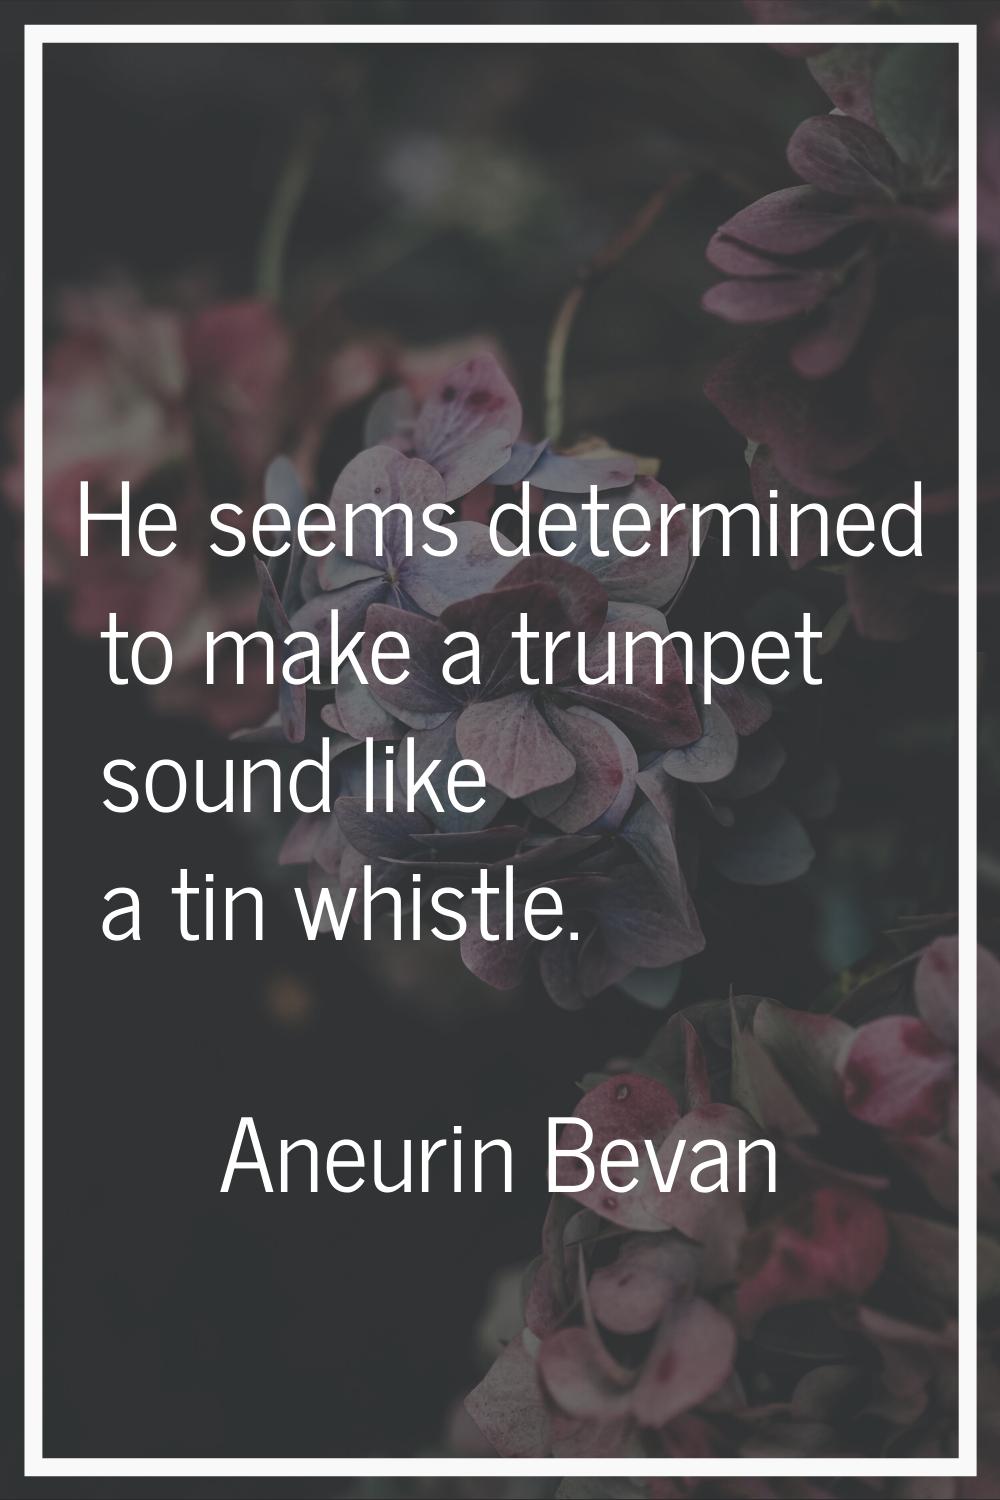 He seems determined to make a trumpet sound like a tin whistle.